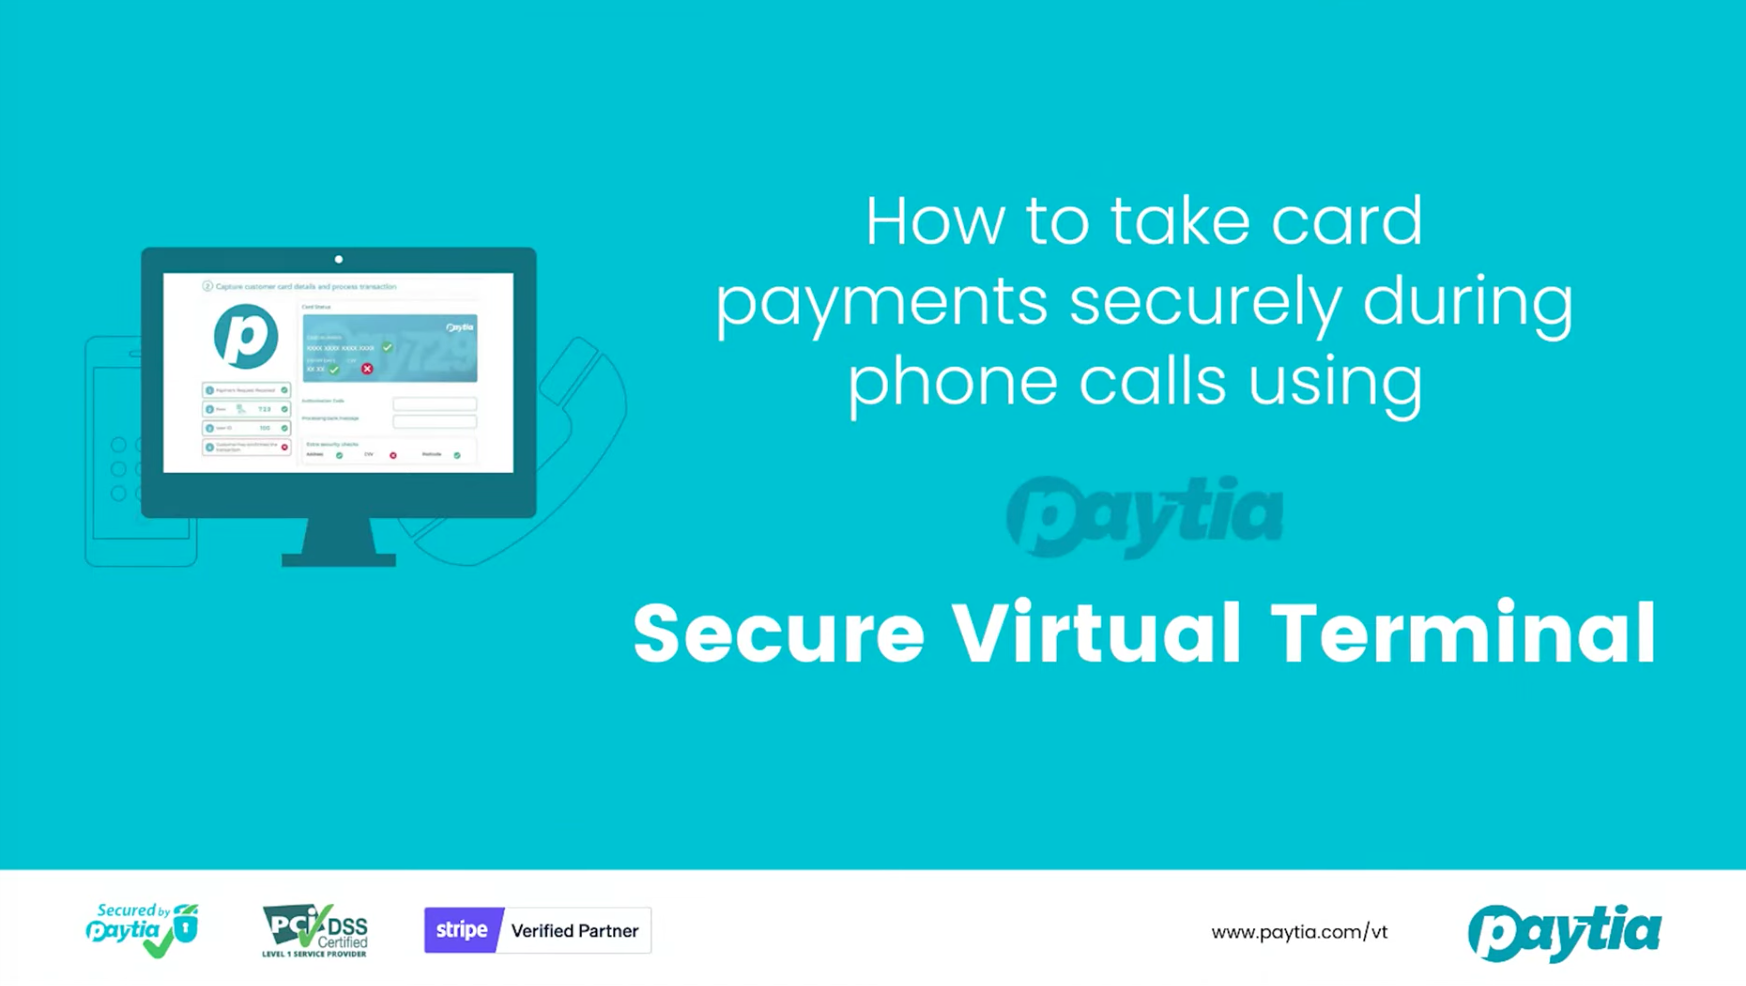 Secure Virtual Terminal by Paytia